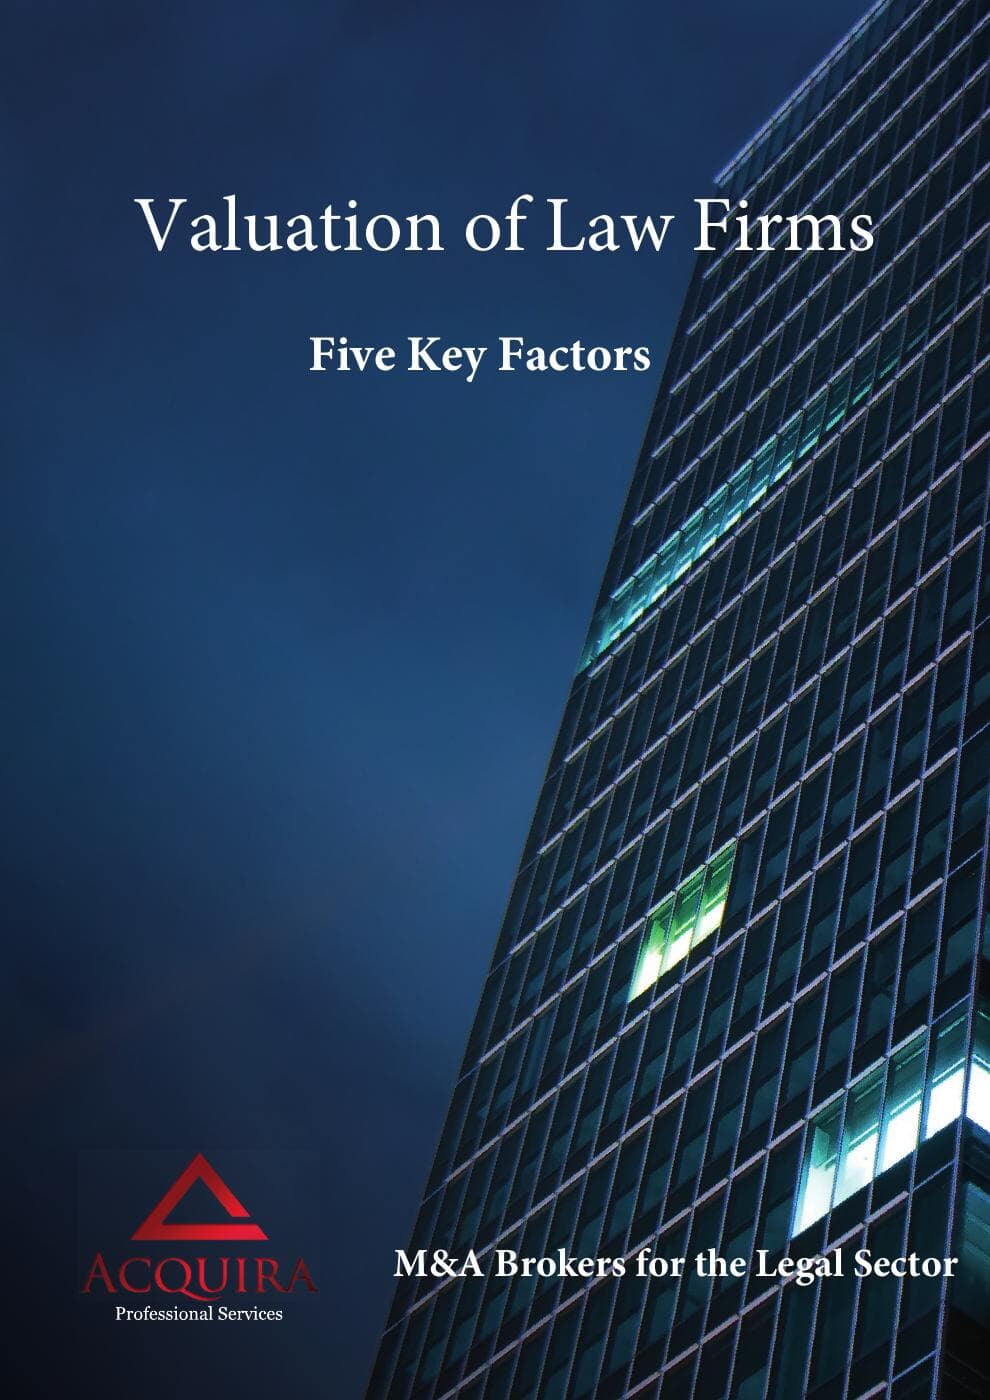 How to value a law firm?